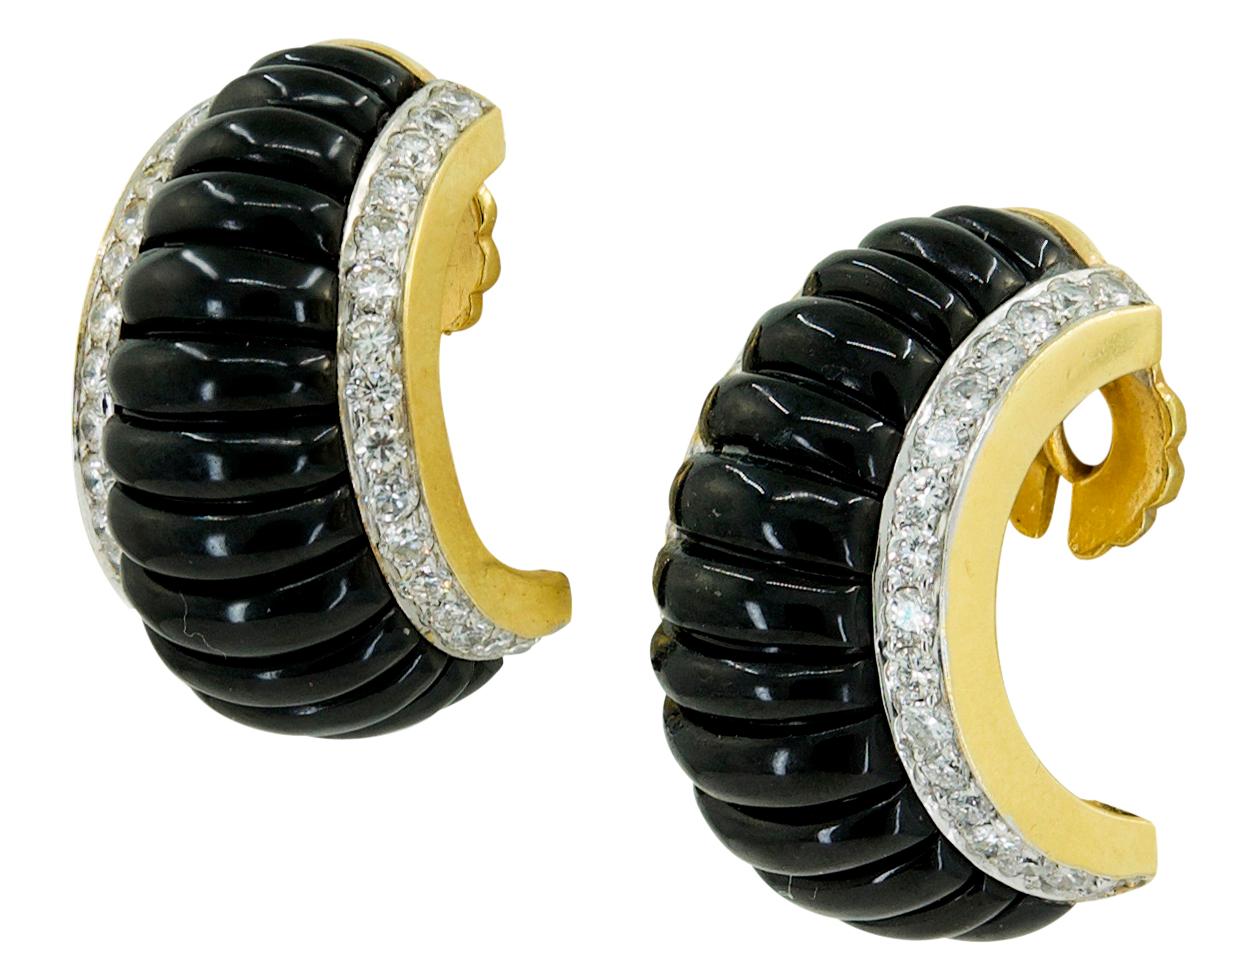 Art Deco Style Onyx Diamond Half Hoop Bombe Earrings in 18k Yellow Gold.

A pair of Art Deco Style half-hoop earrings in a tapered bombé design. Each on-the-ear clip features fluted reeds of carved onyx framed with a row of round brilliant diamonds